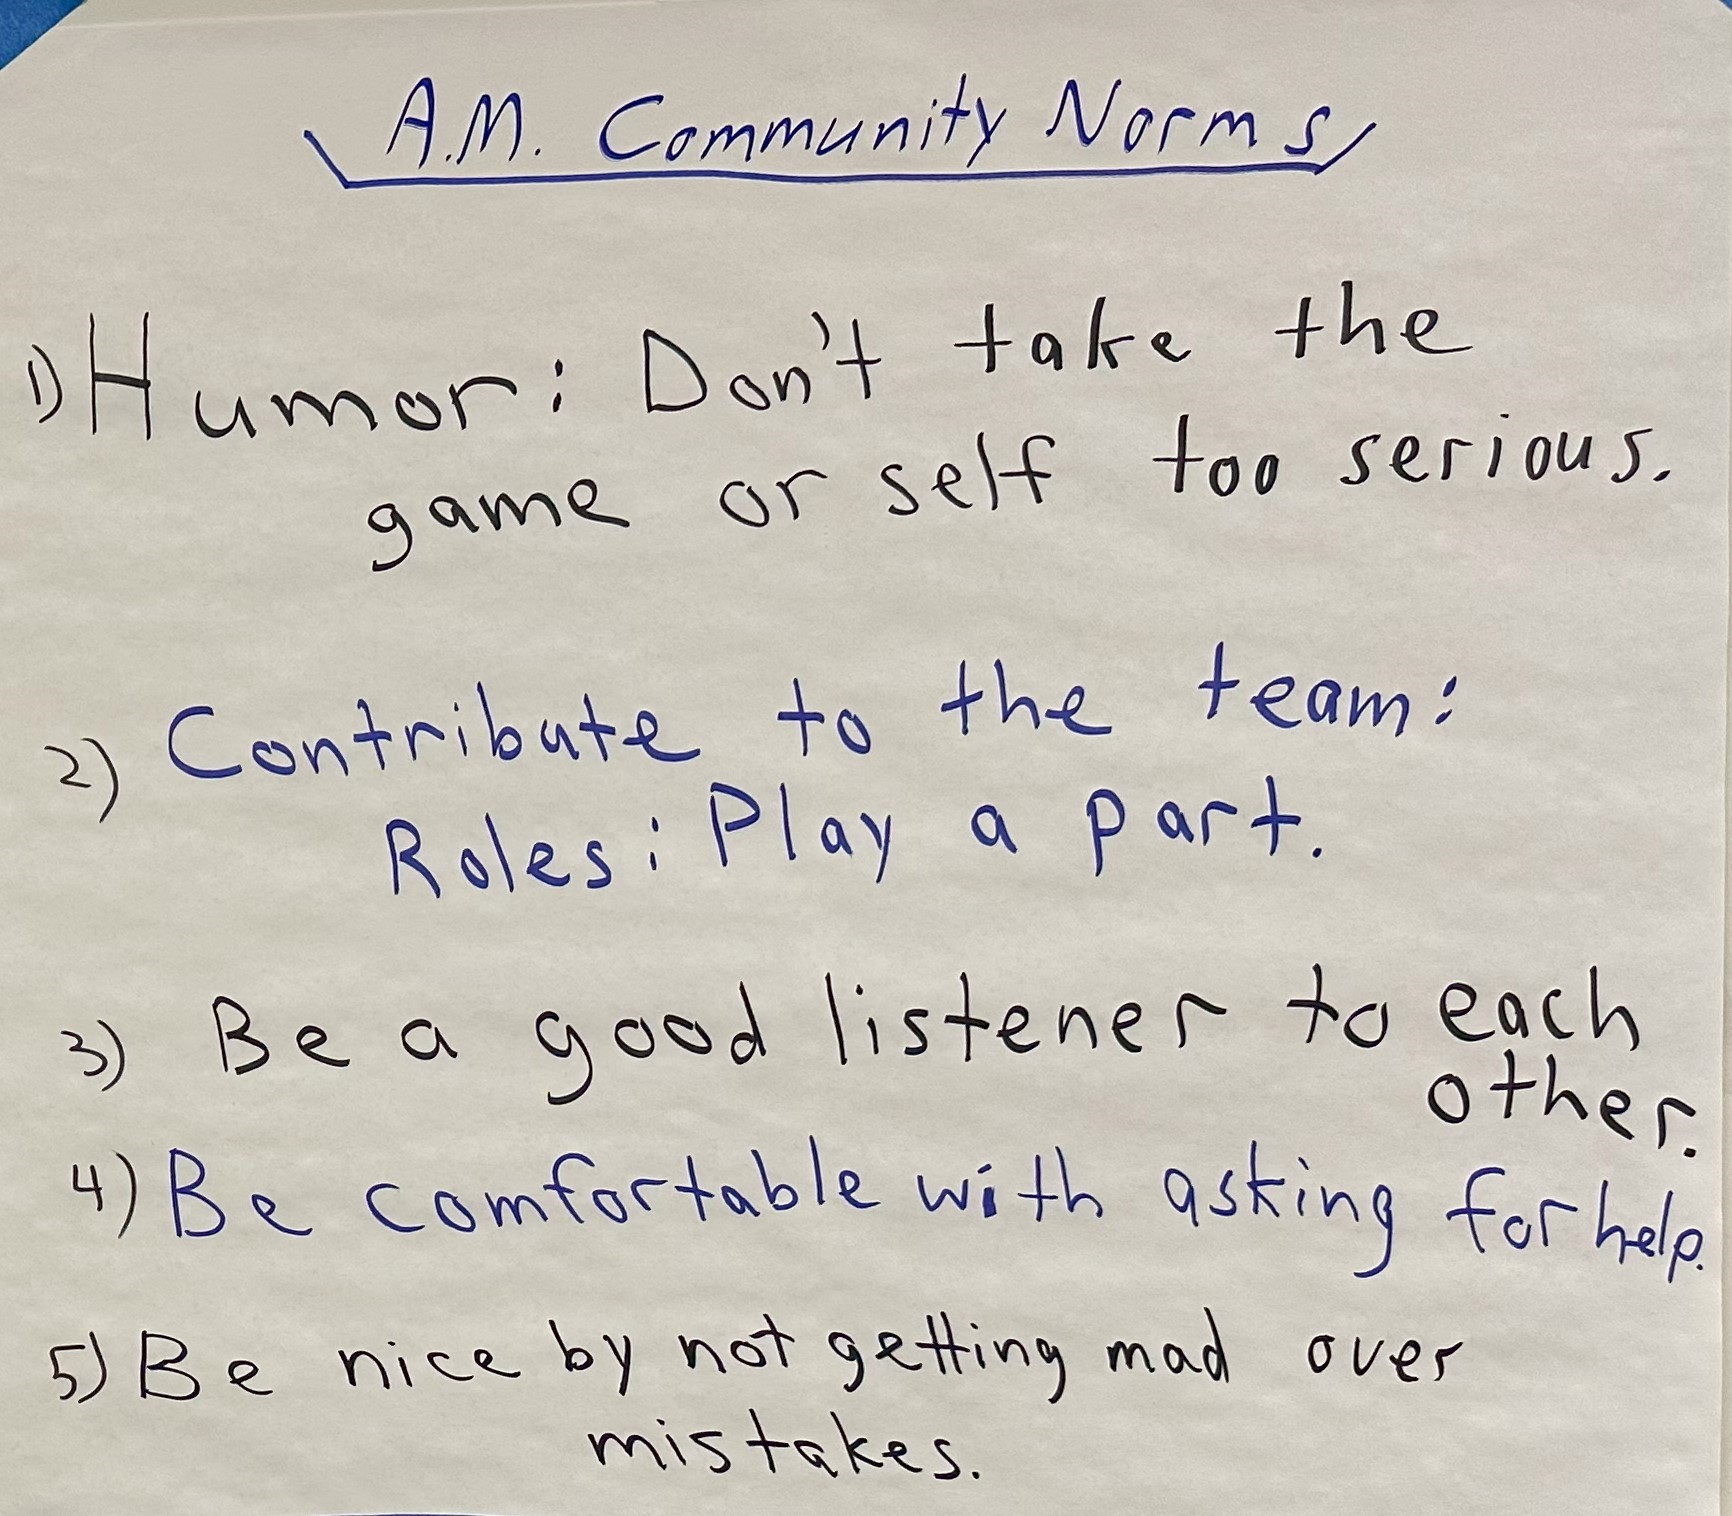 1. Humor: Don't take the game or self too serious. 2. Contribute to the team: Roles: Play a part. 3. Be a good listener to each other. 4. Be comfortable with asking for help. 5. Be nice by not getting mad over mistakes.